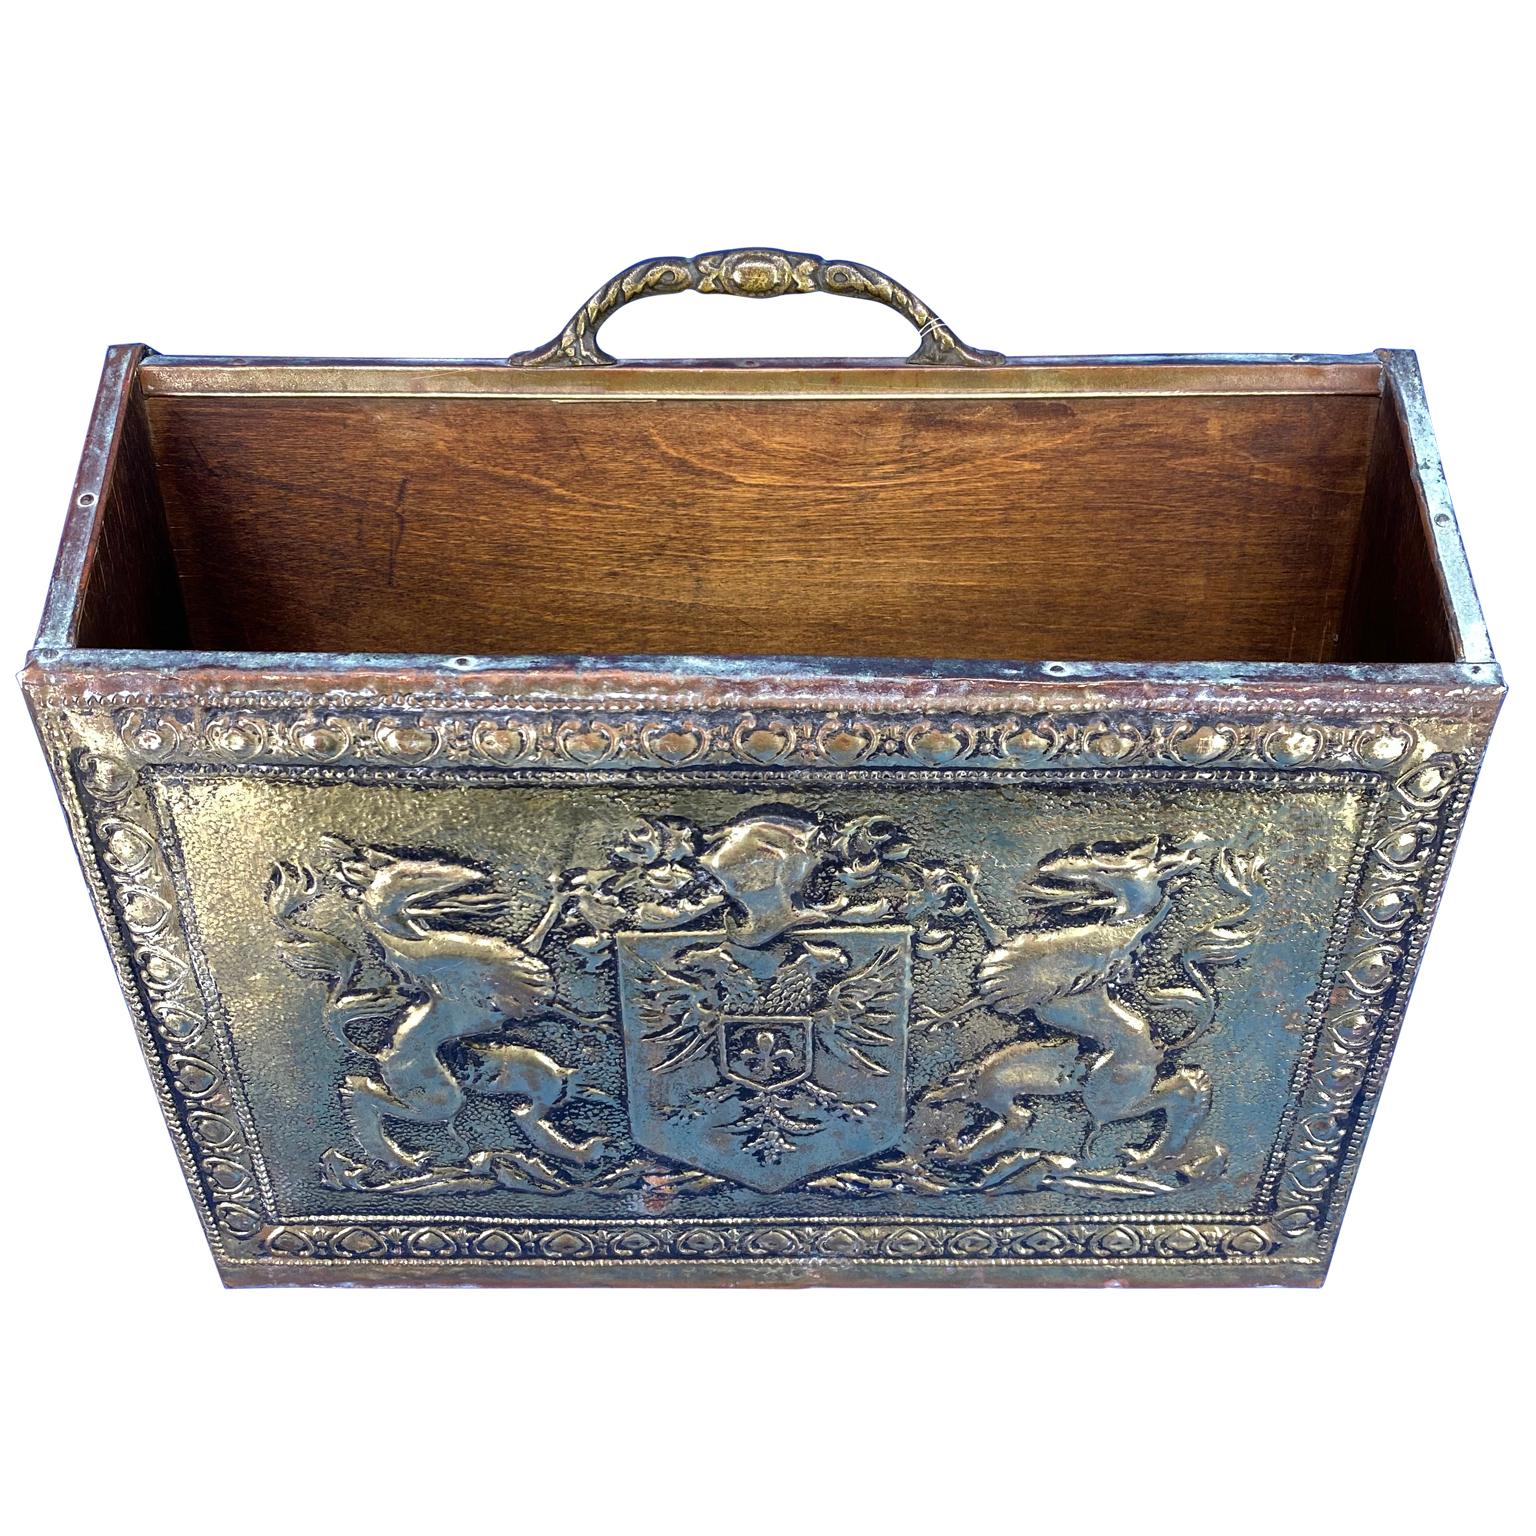 Early Victorian style brass magazine rack with code of arms, griffins and eagles.